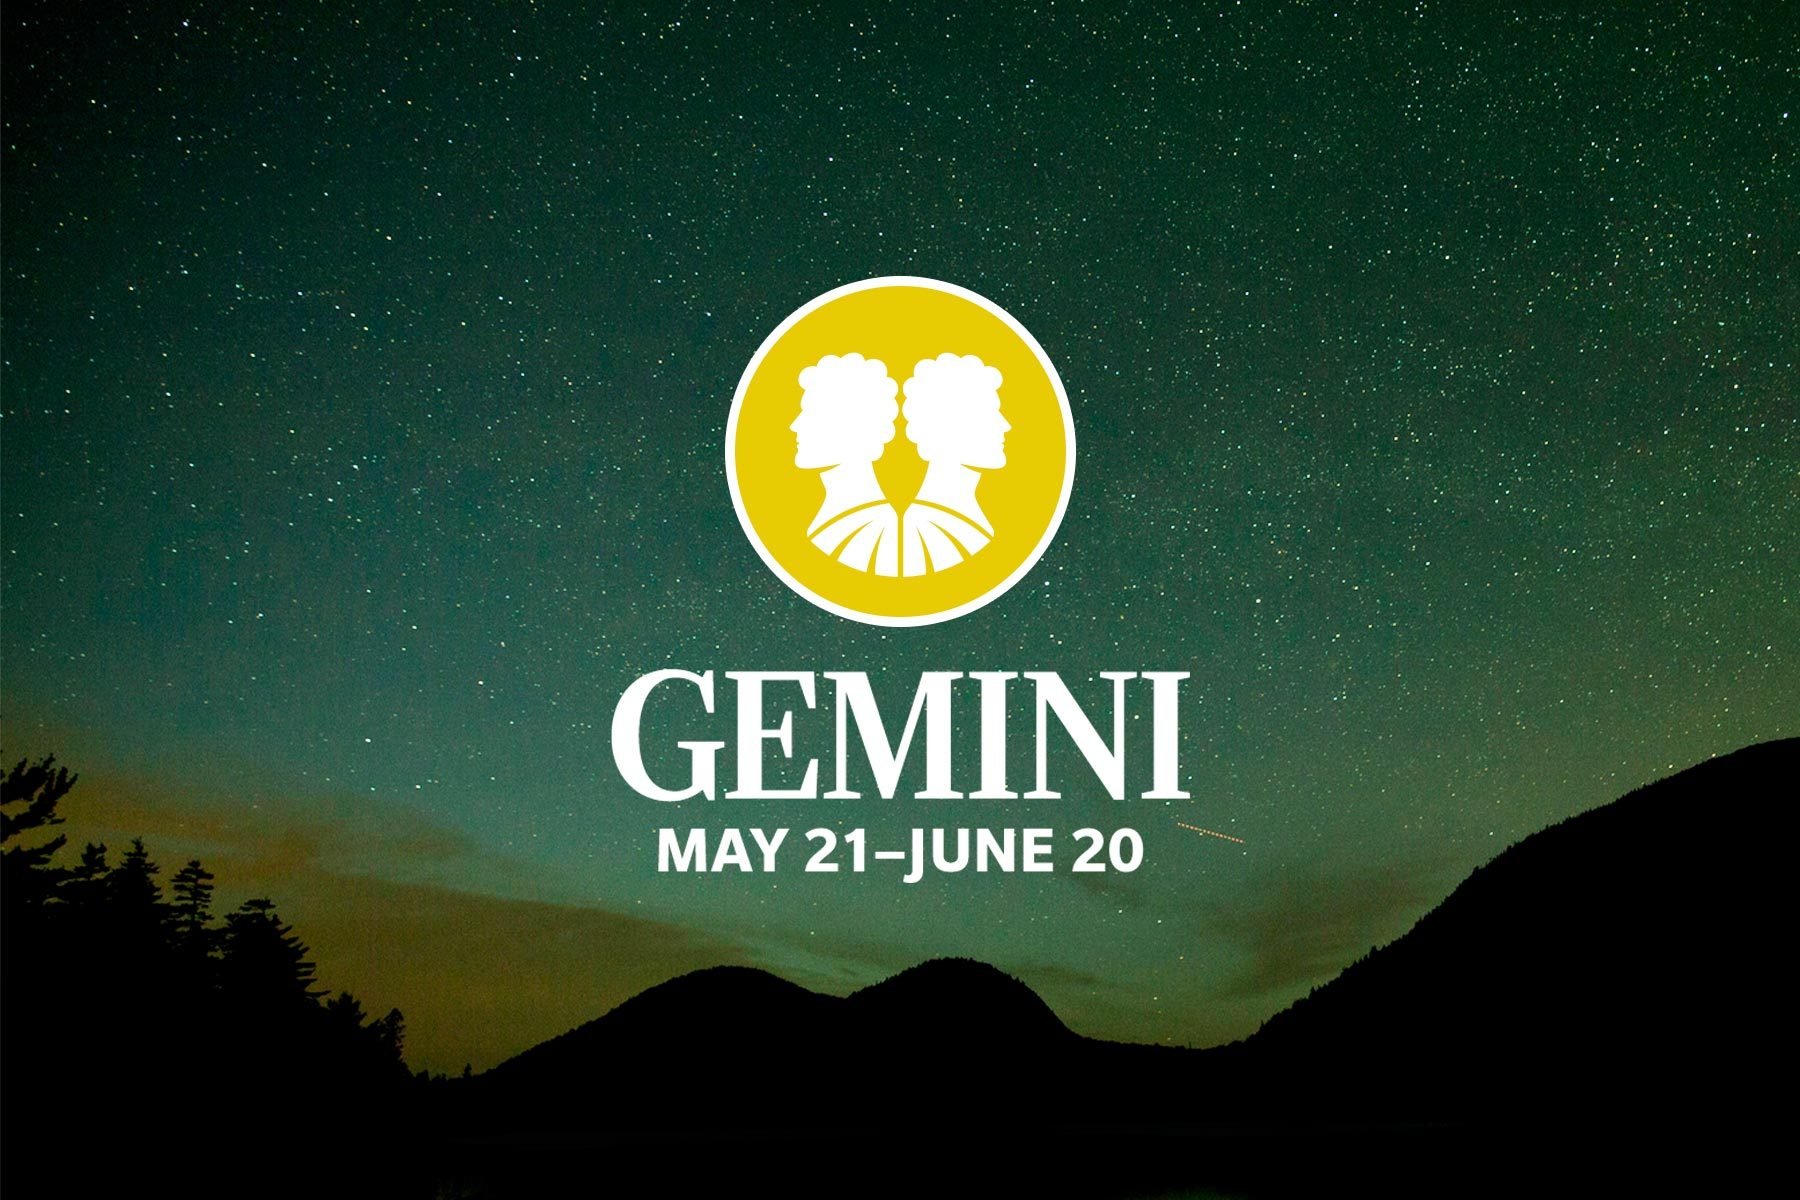 Zodiac Sign Colors gemini on galaxy background green and yellow